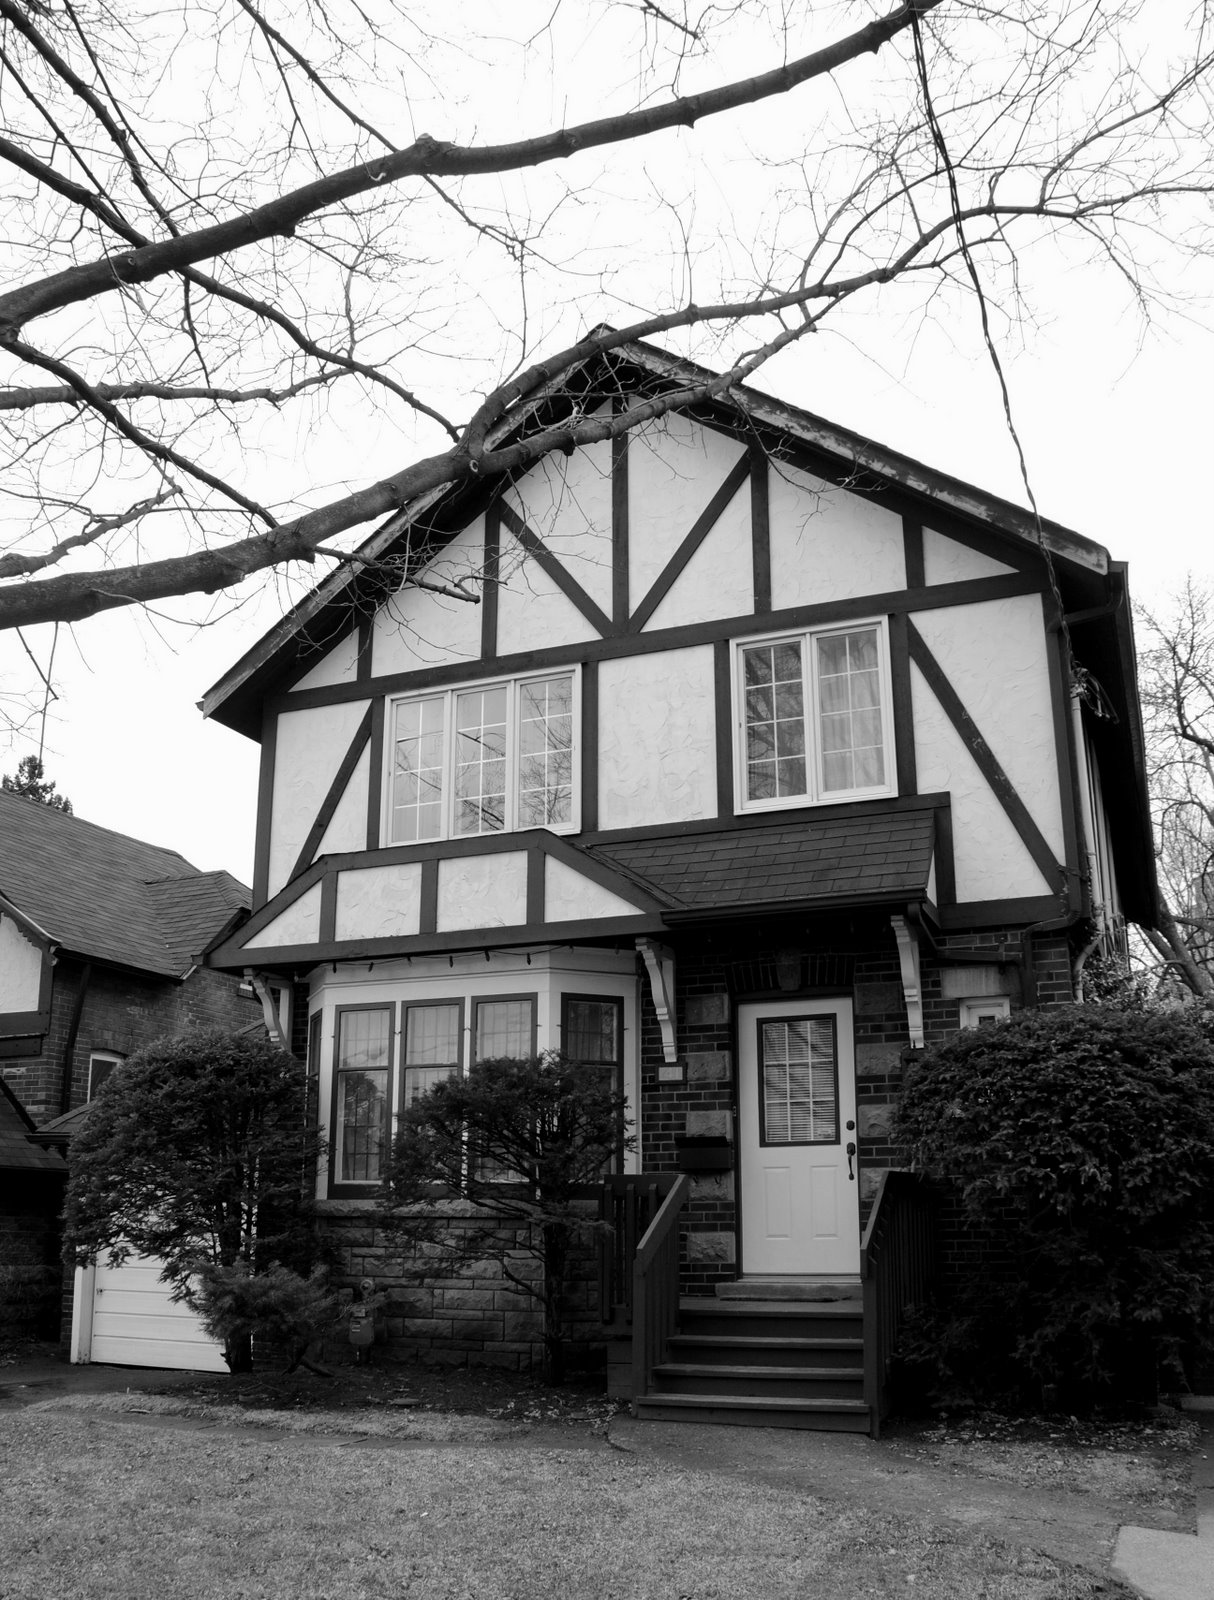 One a Day from Toronto: Black and white home